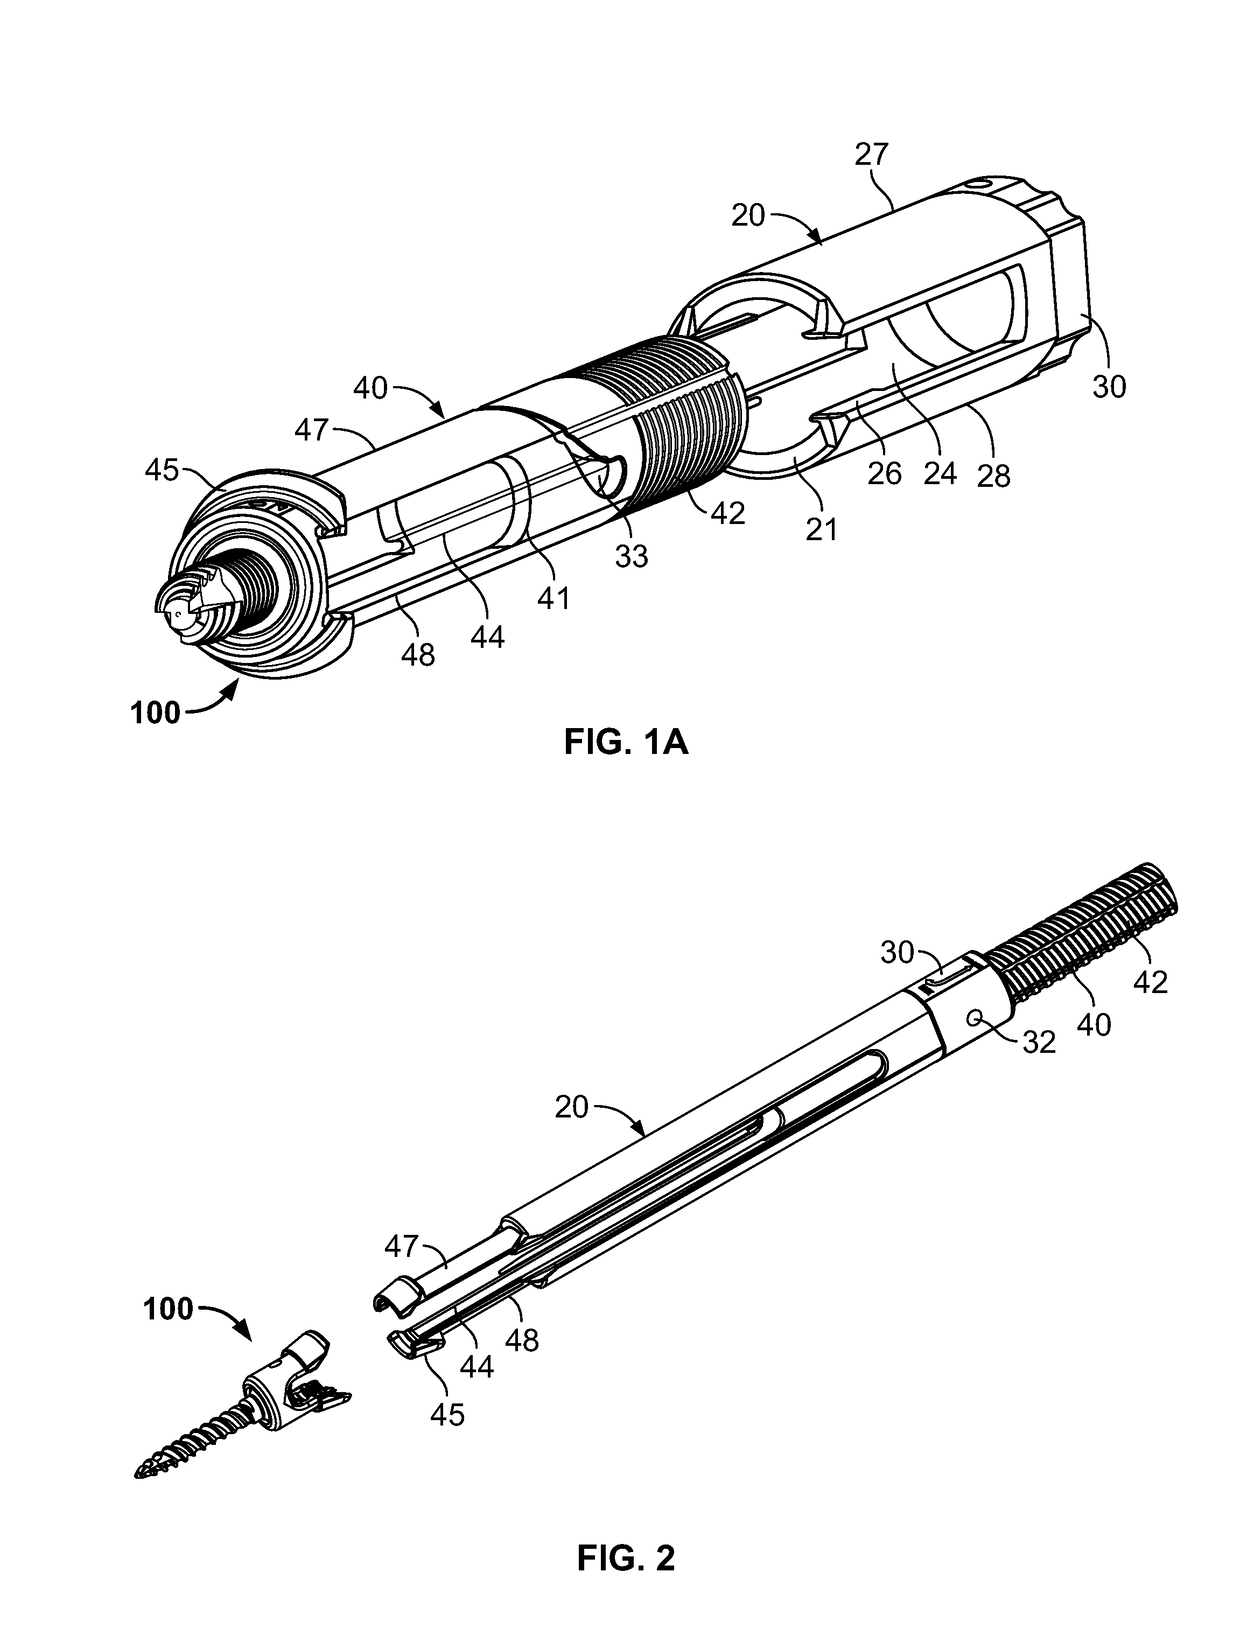 Minimally invasive screw extension assembly